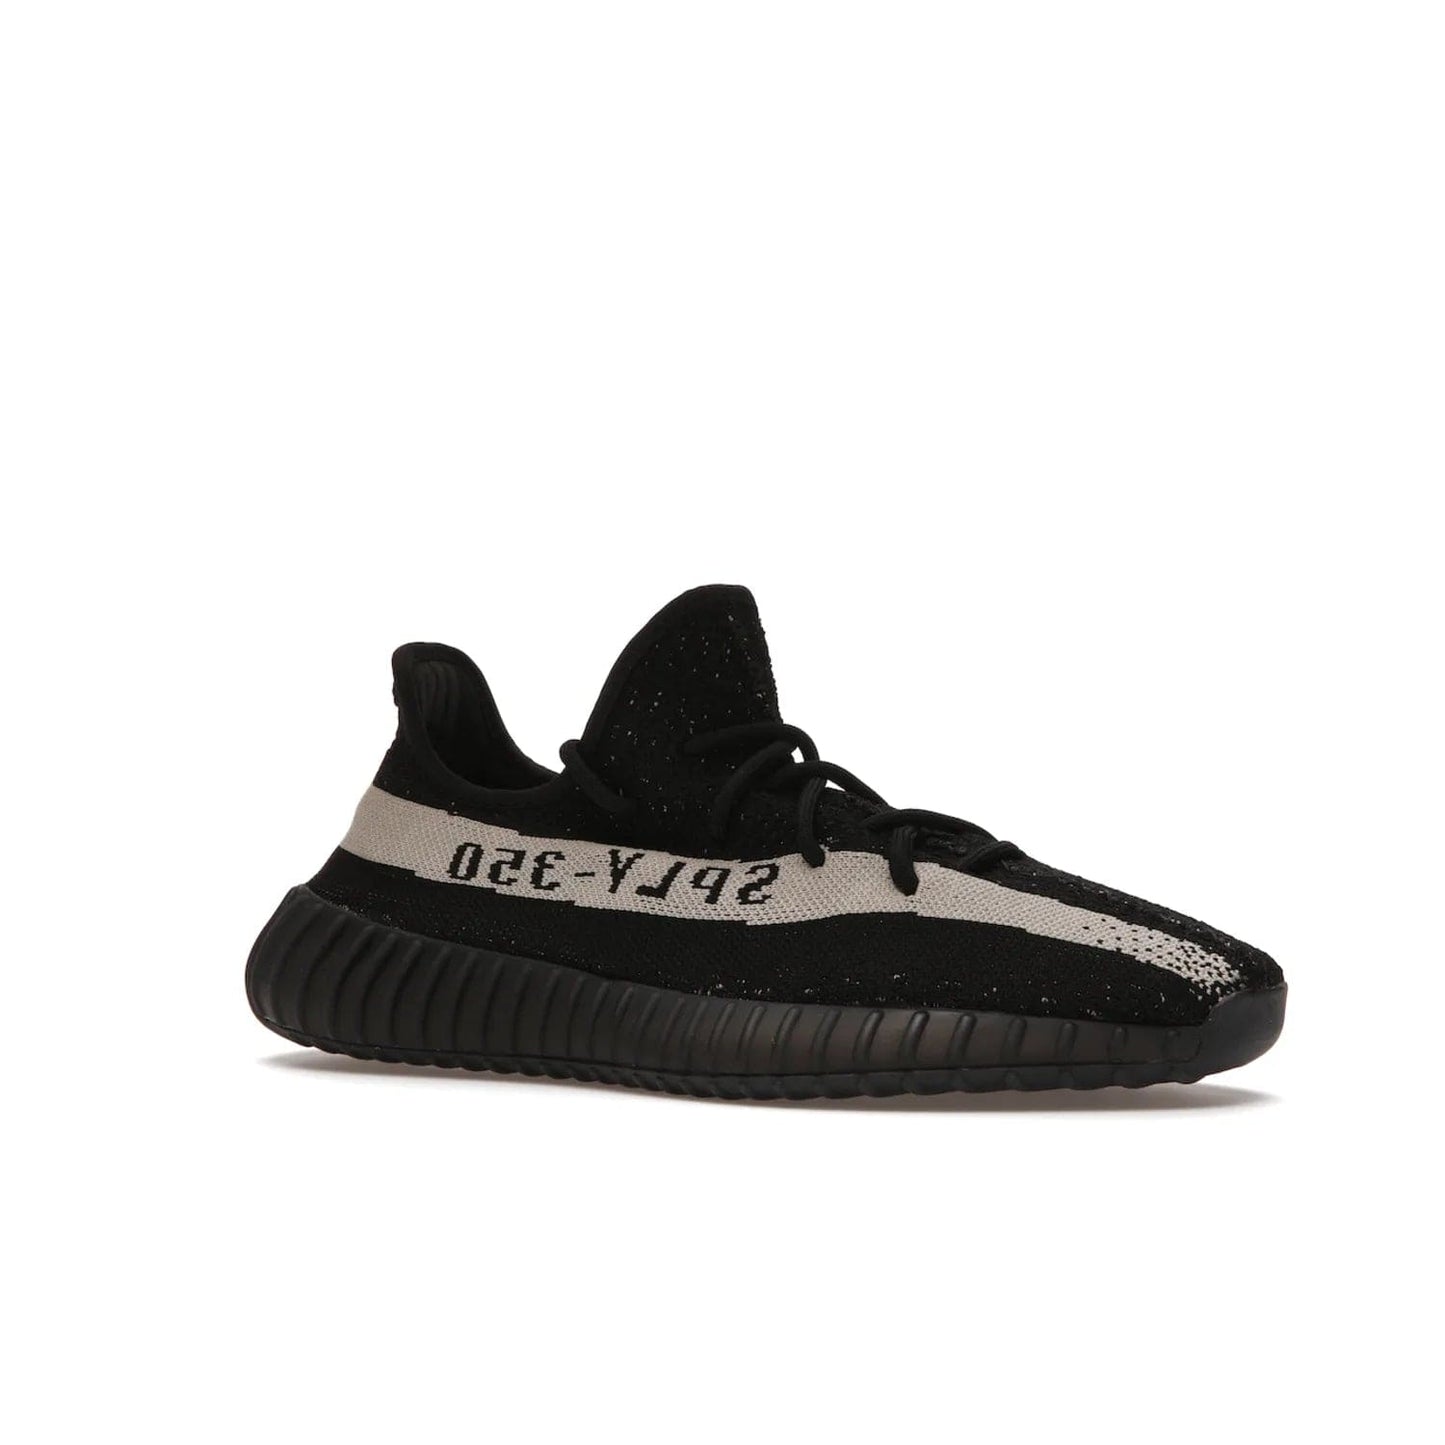 adidas Yeezy Boost 350 V2 Core Black White (2016/2022) - Image 4 - Only at www.BallersClubKickz.com - Stylish adidas Yeezy Boost 350 V2 in classic black with white "SPLY-350" stitched to the side stripe. Features Primeknit upper & Boost sole for comfort. Restock in March 2022.